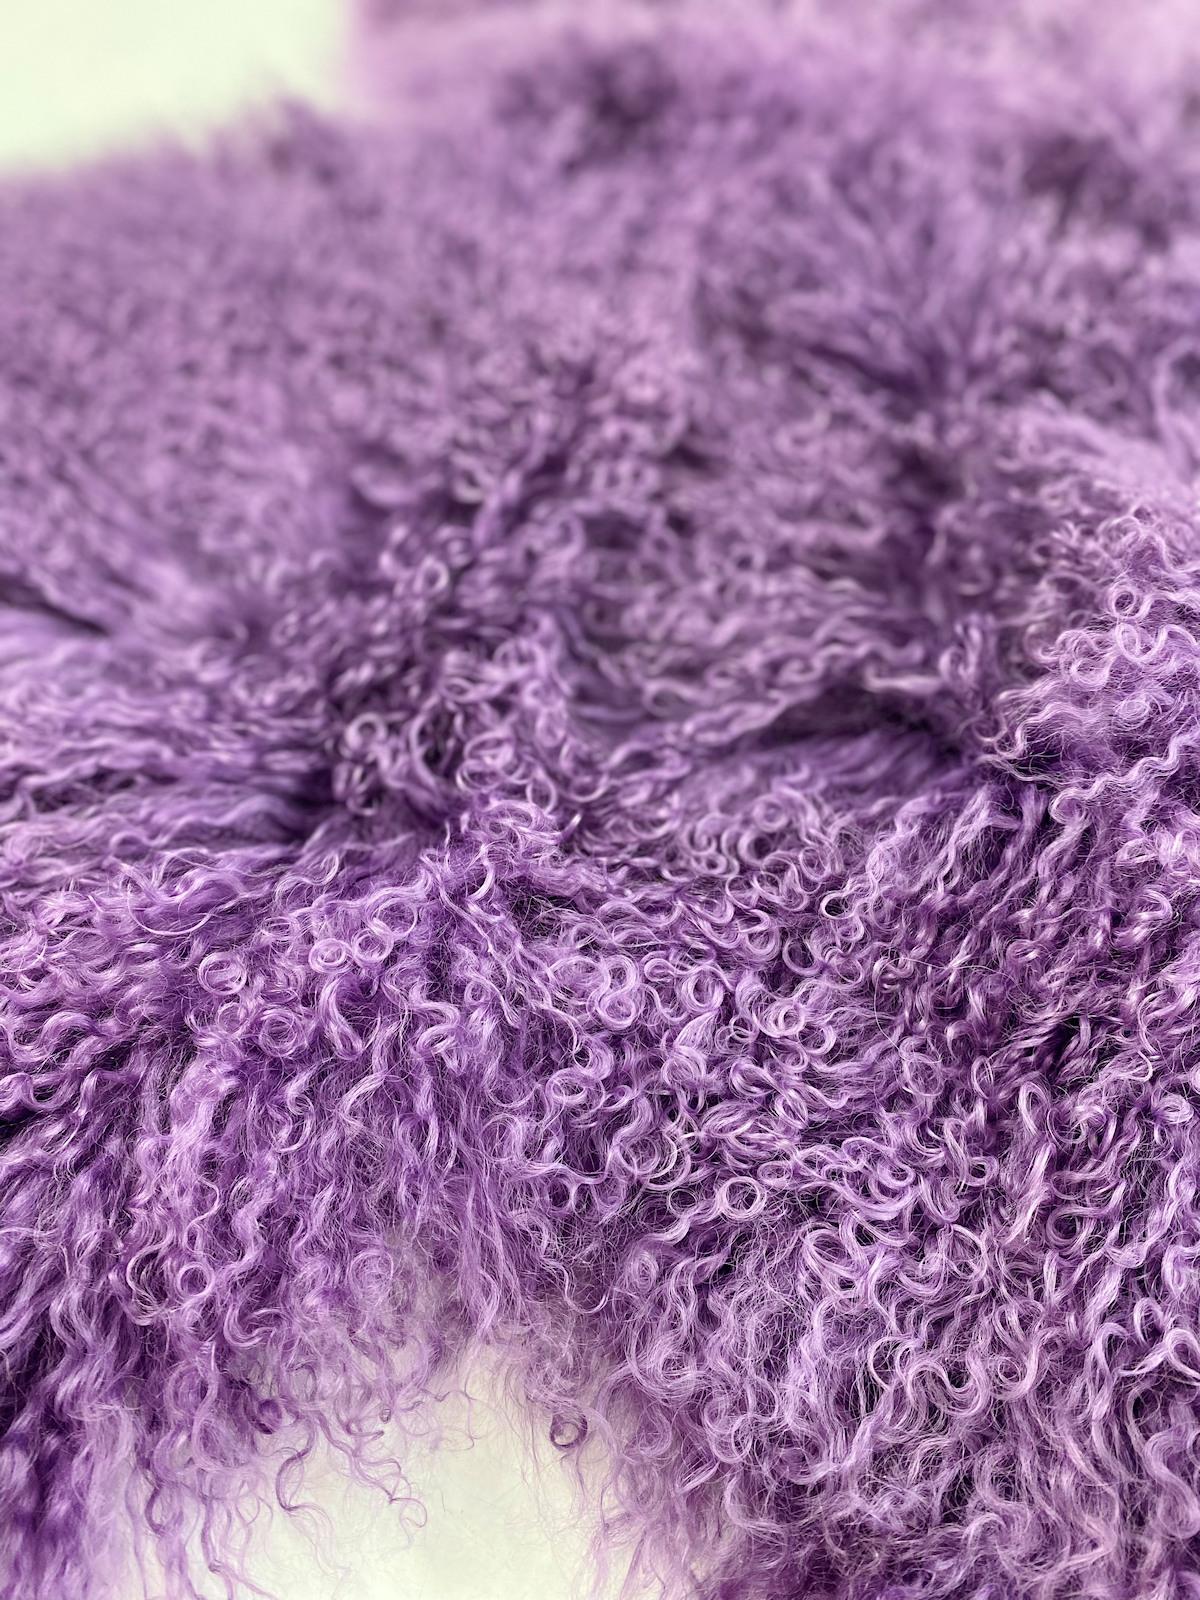 From alluring softness to sustainable and organic design, this purple fur rug hand-crafted from genuine Mongolian sheepskin translates modern and stylish design paralleled with an expression of natural signature living. 

Featuring an eclectic